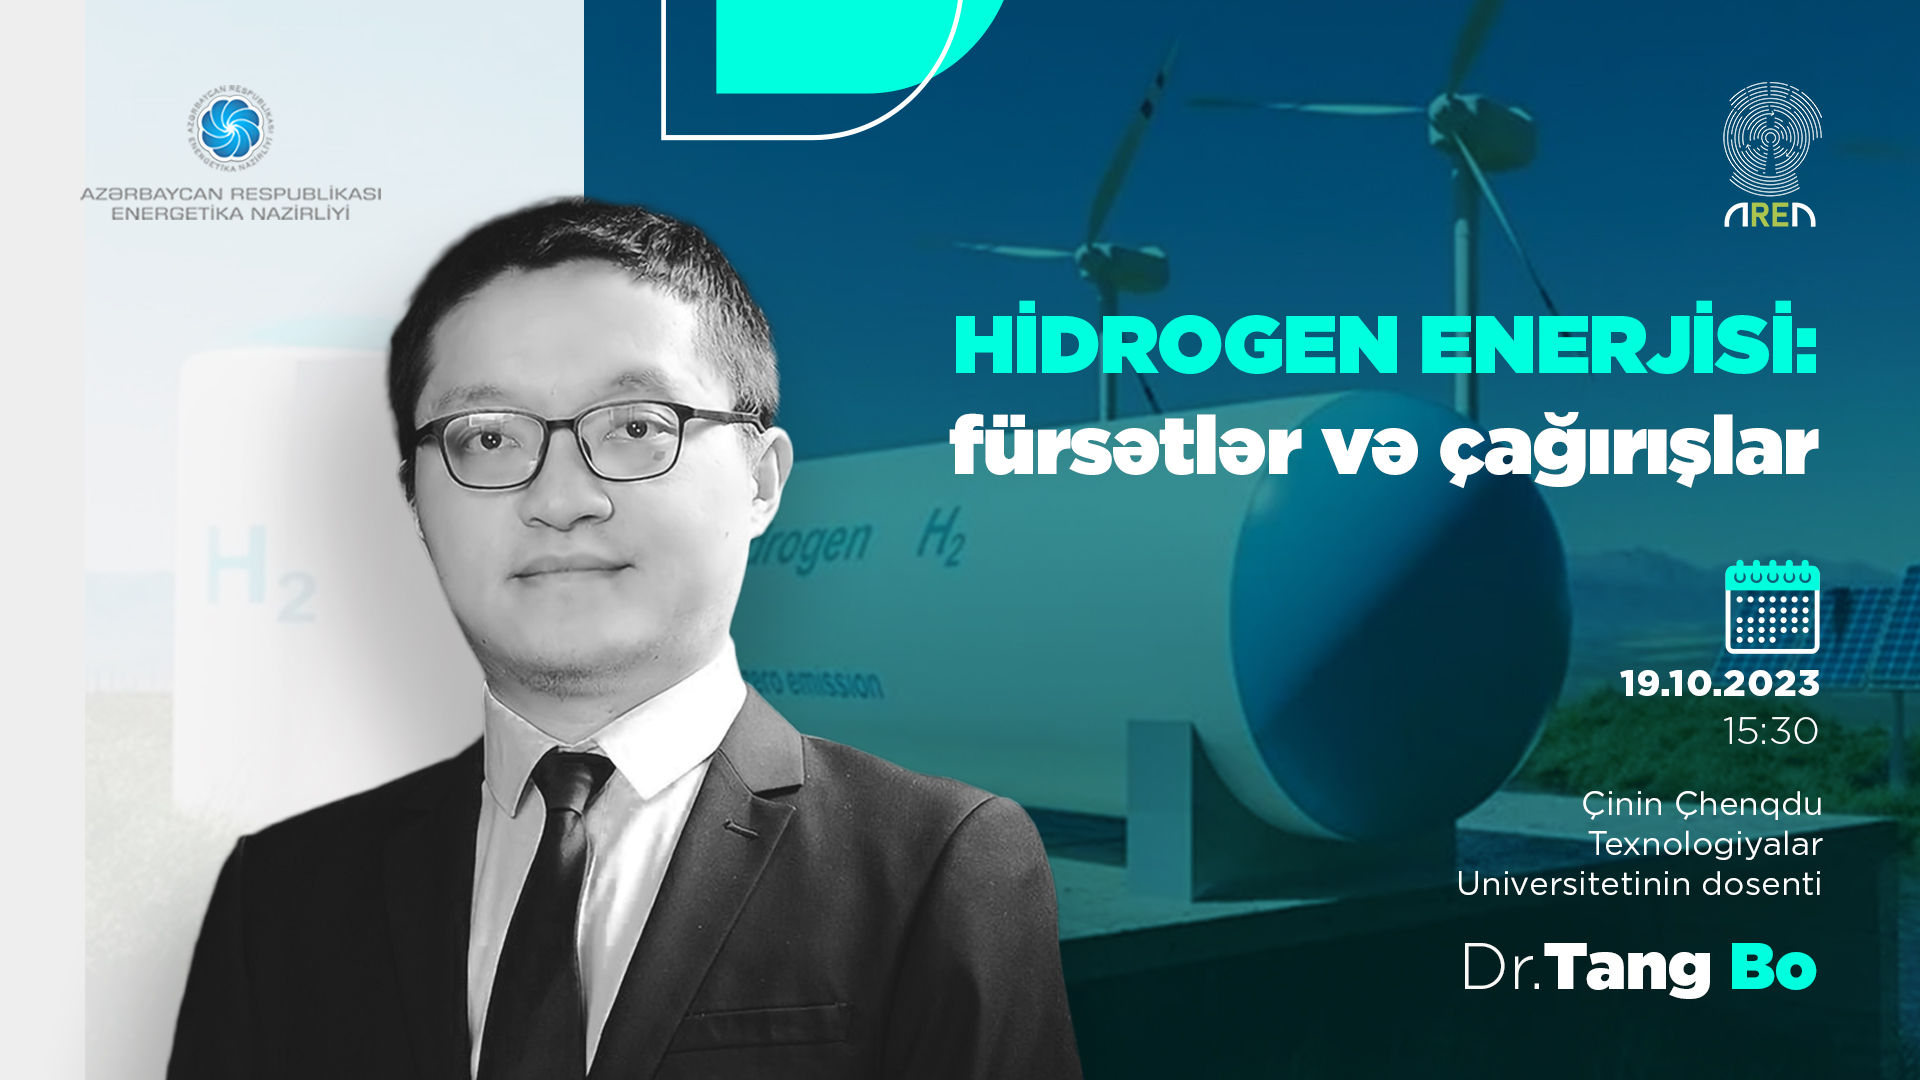 Webinar on Hydrogen Energy: Opportunities and Challenges to be held